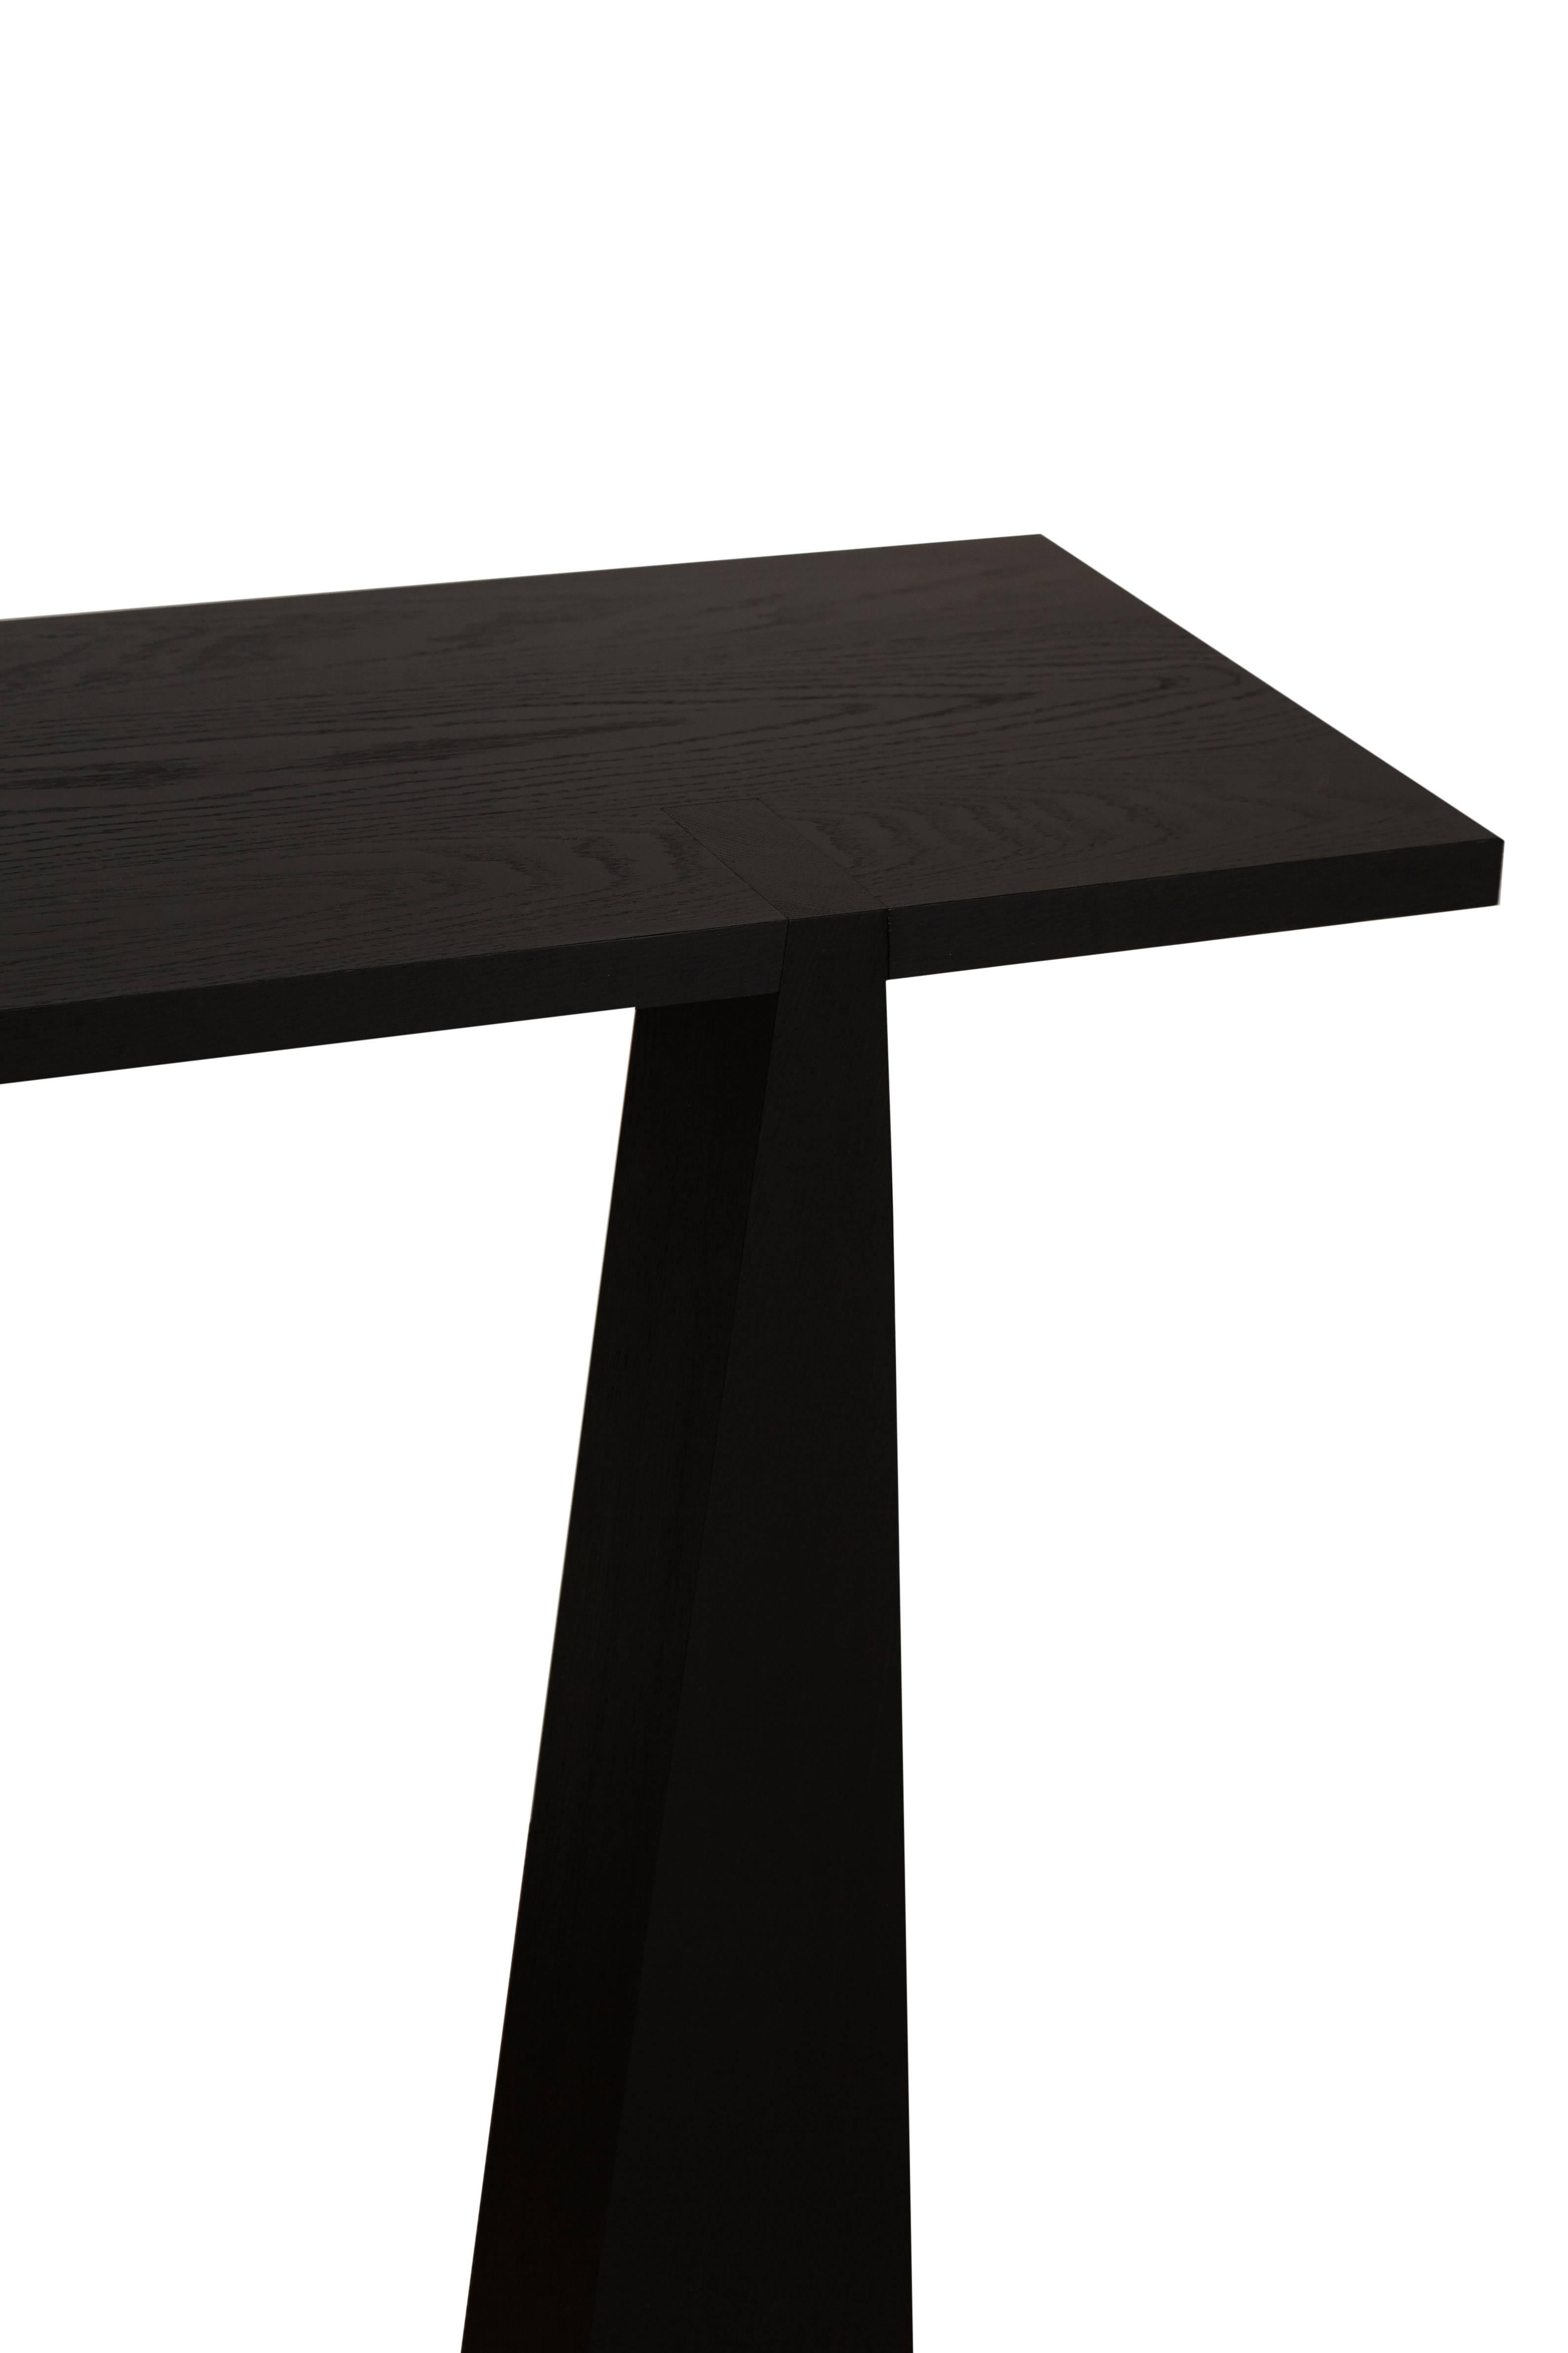 Nylander solid oak tapered three-leg console table shown in a matte black open grain finish. Solid construction and exposed joinery on top detail this sculptural form.